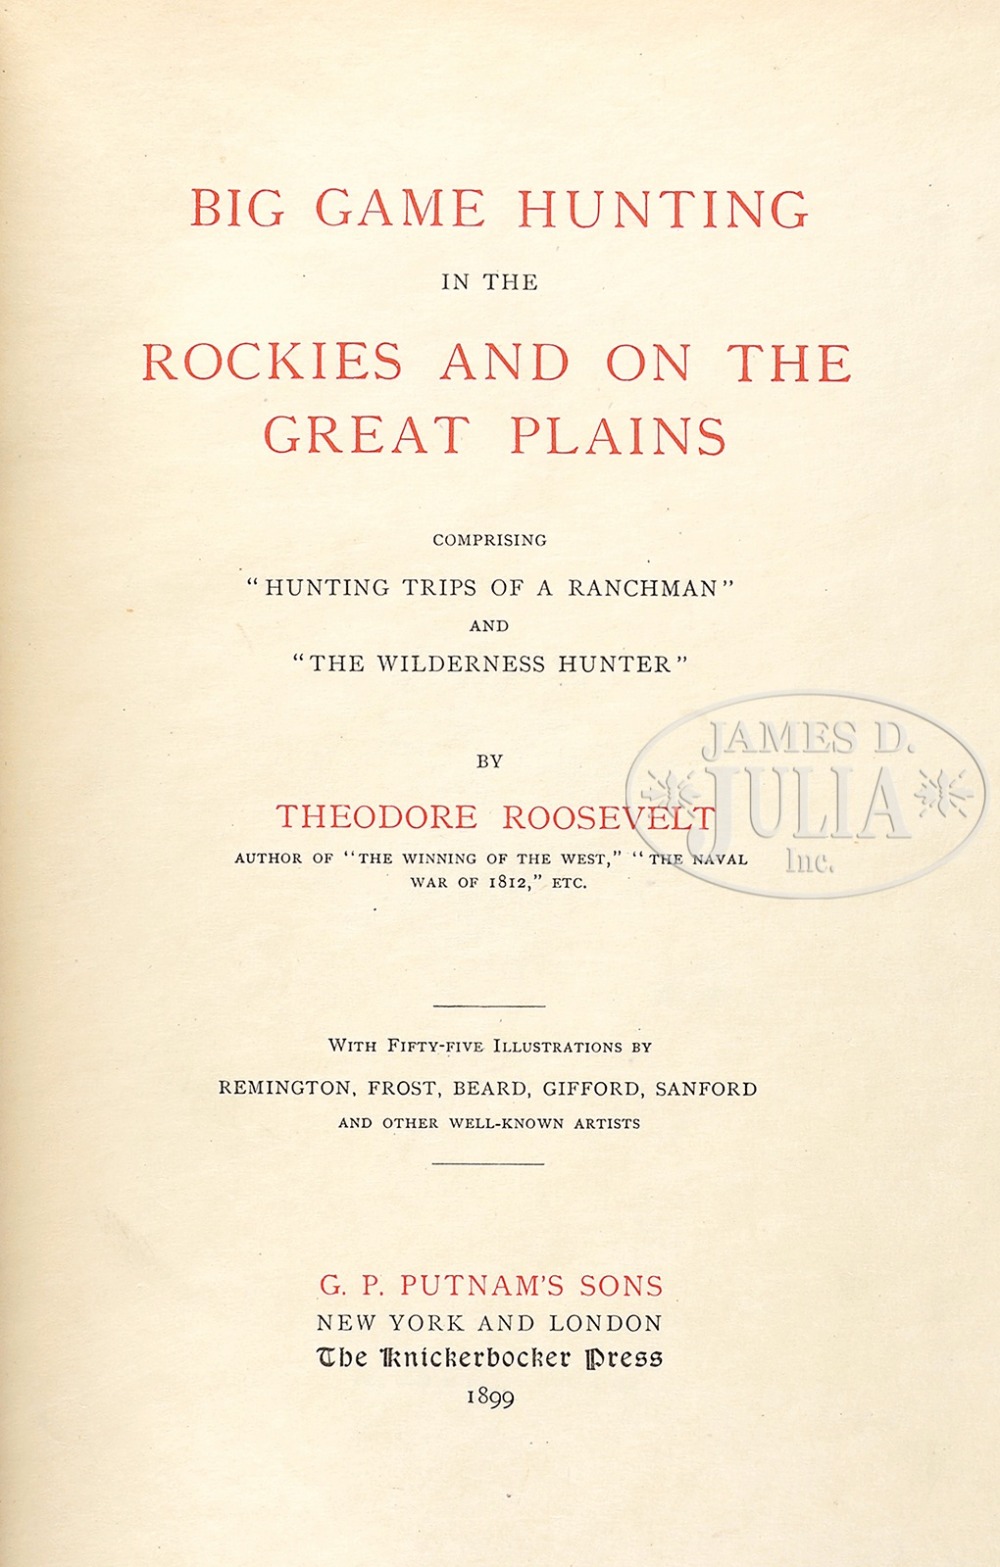 BOOK: BIG GAME HUNTING IN THE ROCKIES & ON THE GREAT PLAINS BY THEODORE ROOSEVELT 646/1000 1899 G